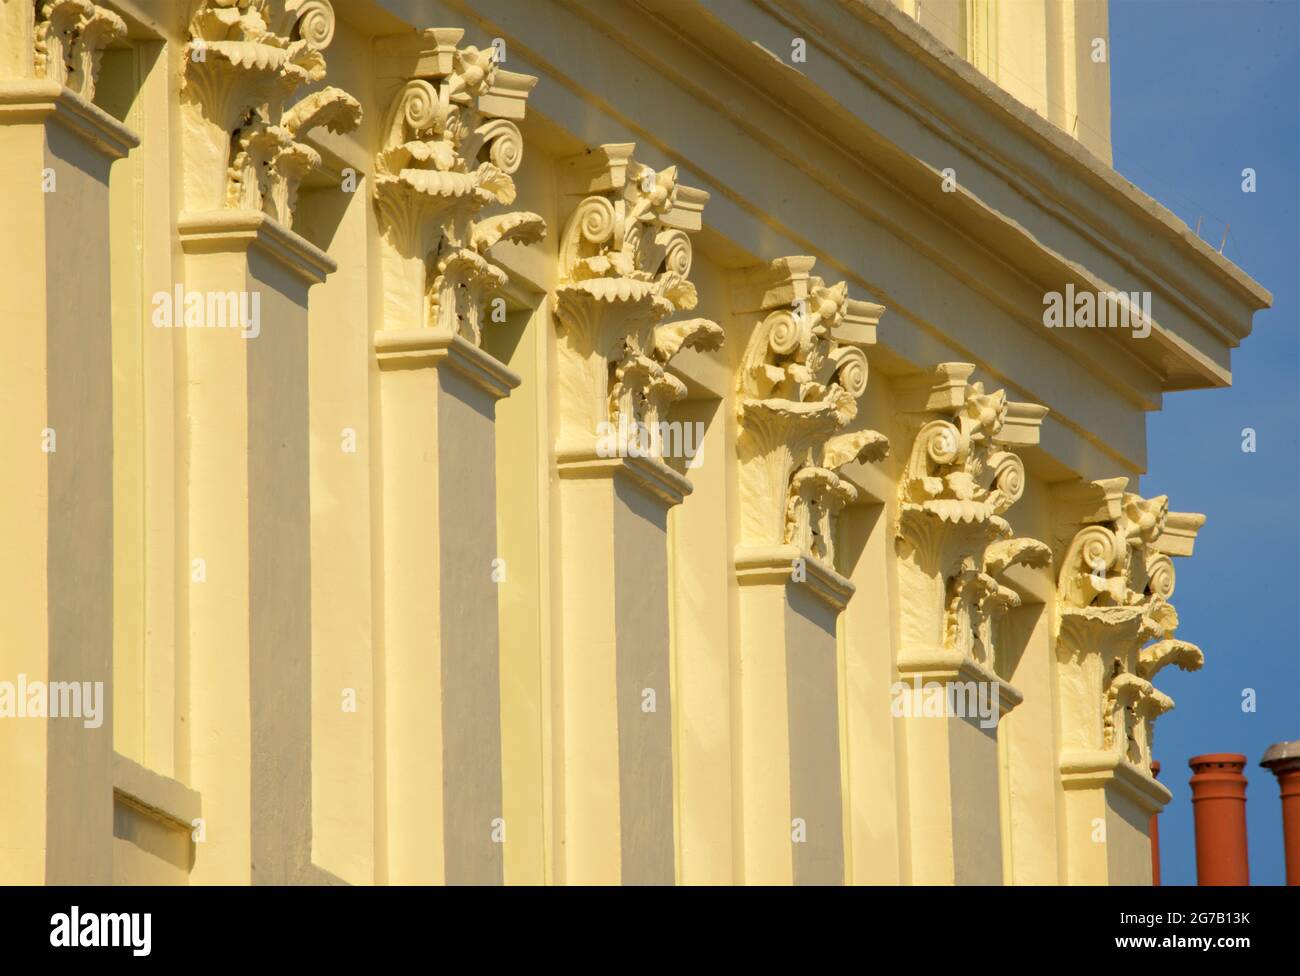 Detail of Corinthian column capitals of Brunswick Terrace, part of a complex of elegant Regency houses in Hove on Brighton and Hove seafront. East Sussex England UK Stock Photo